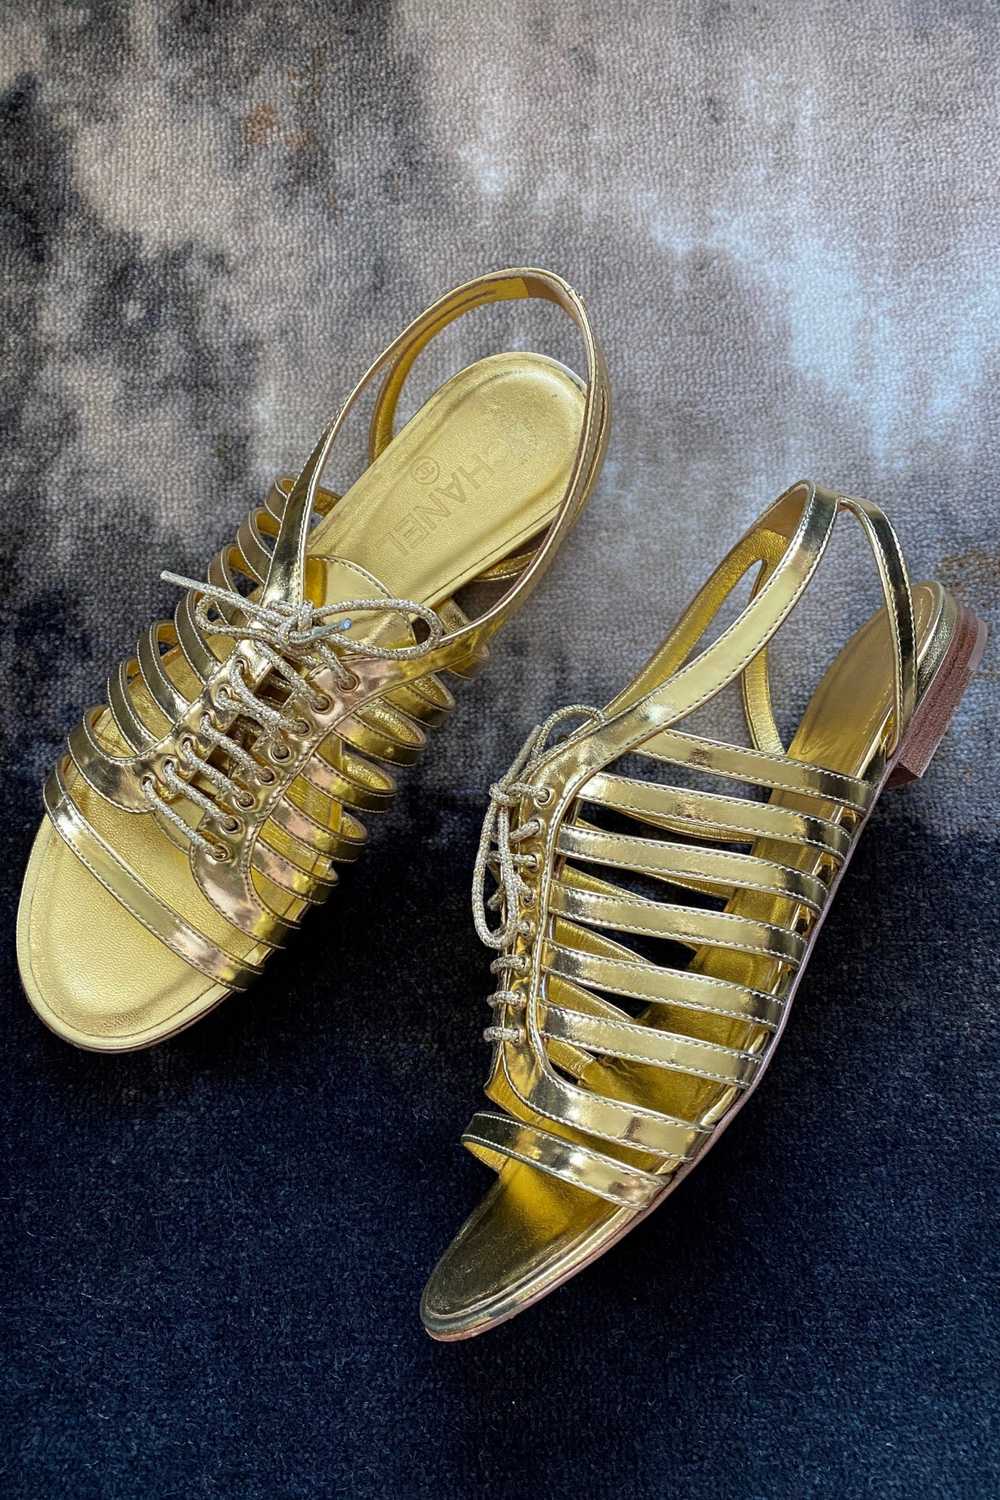 CHANEL GOLD LACE-UP CAGE SHOE - image 1